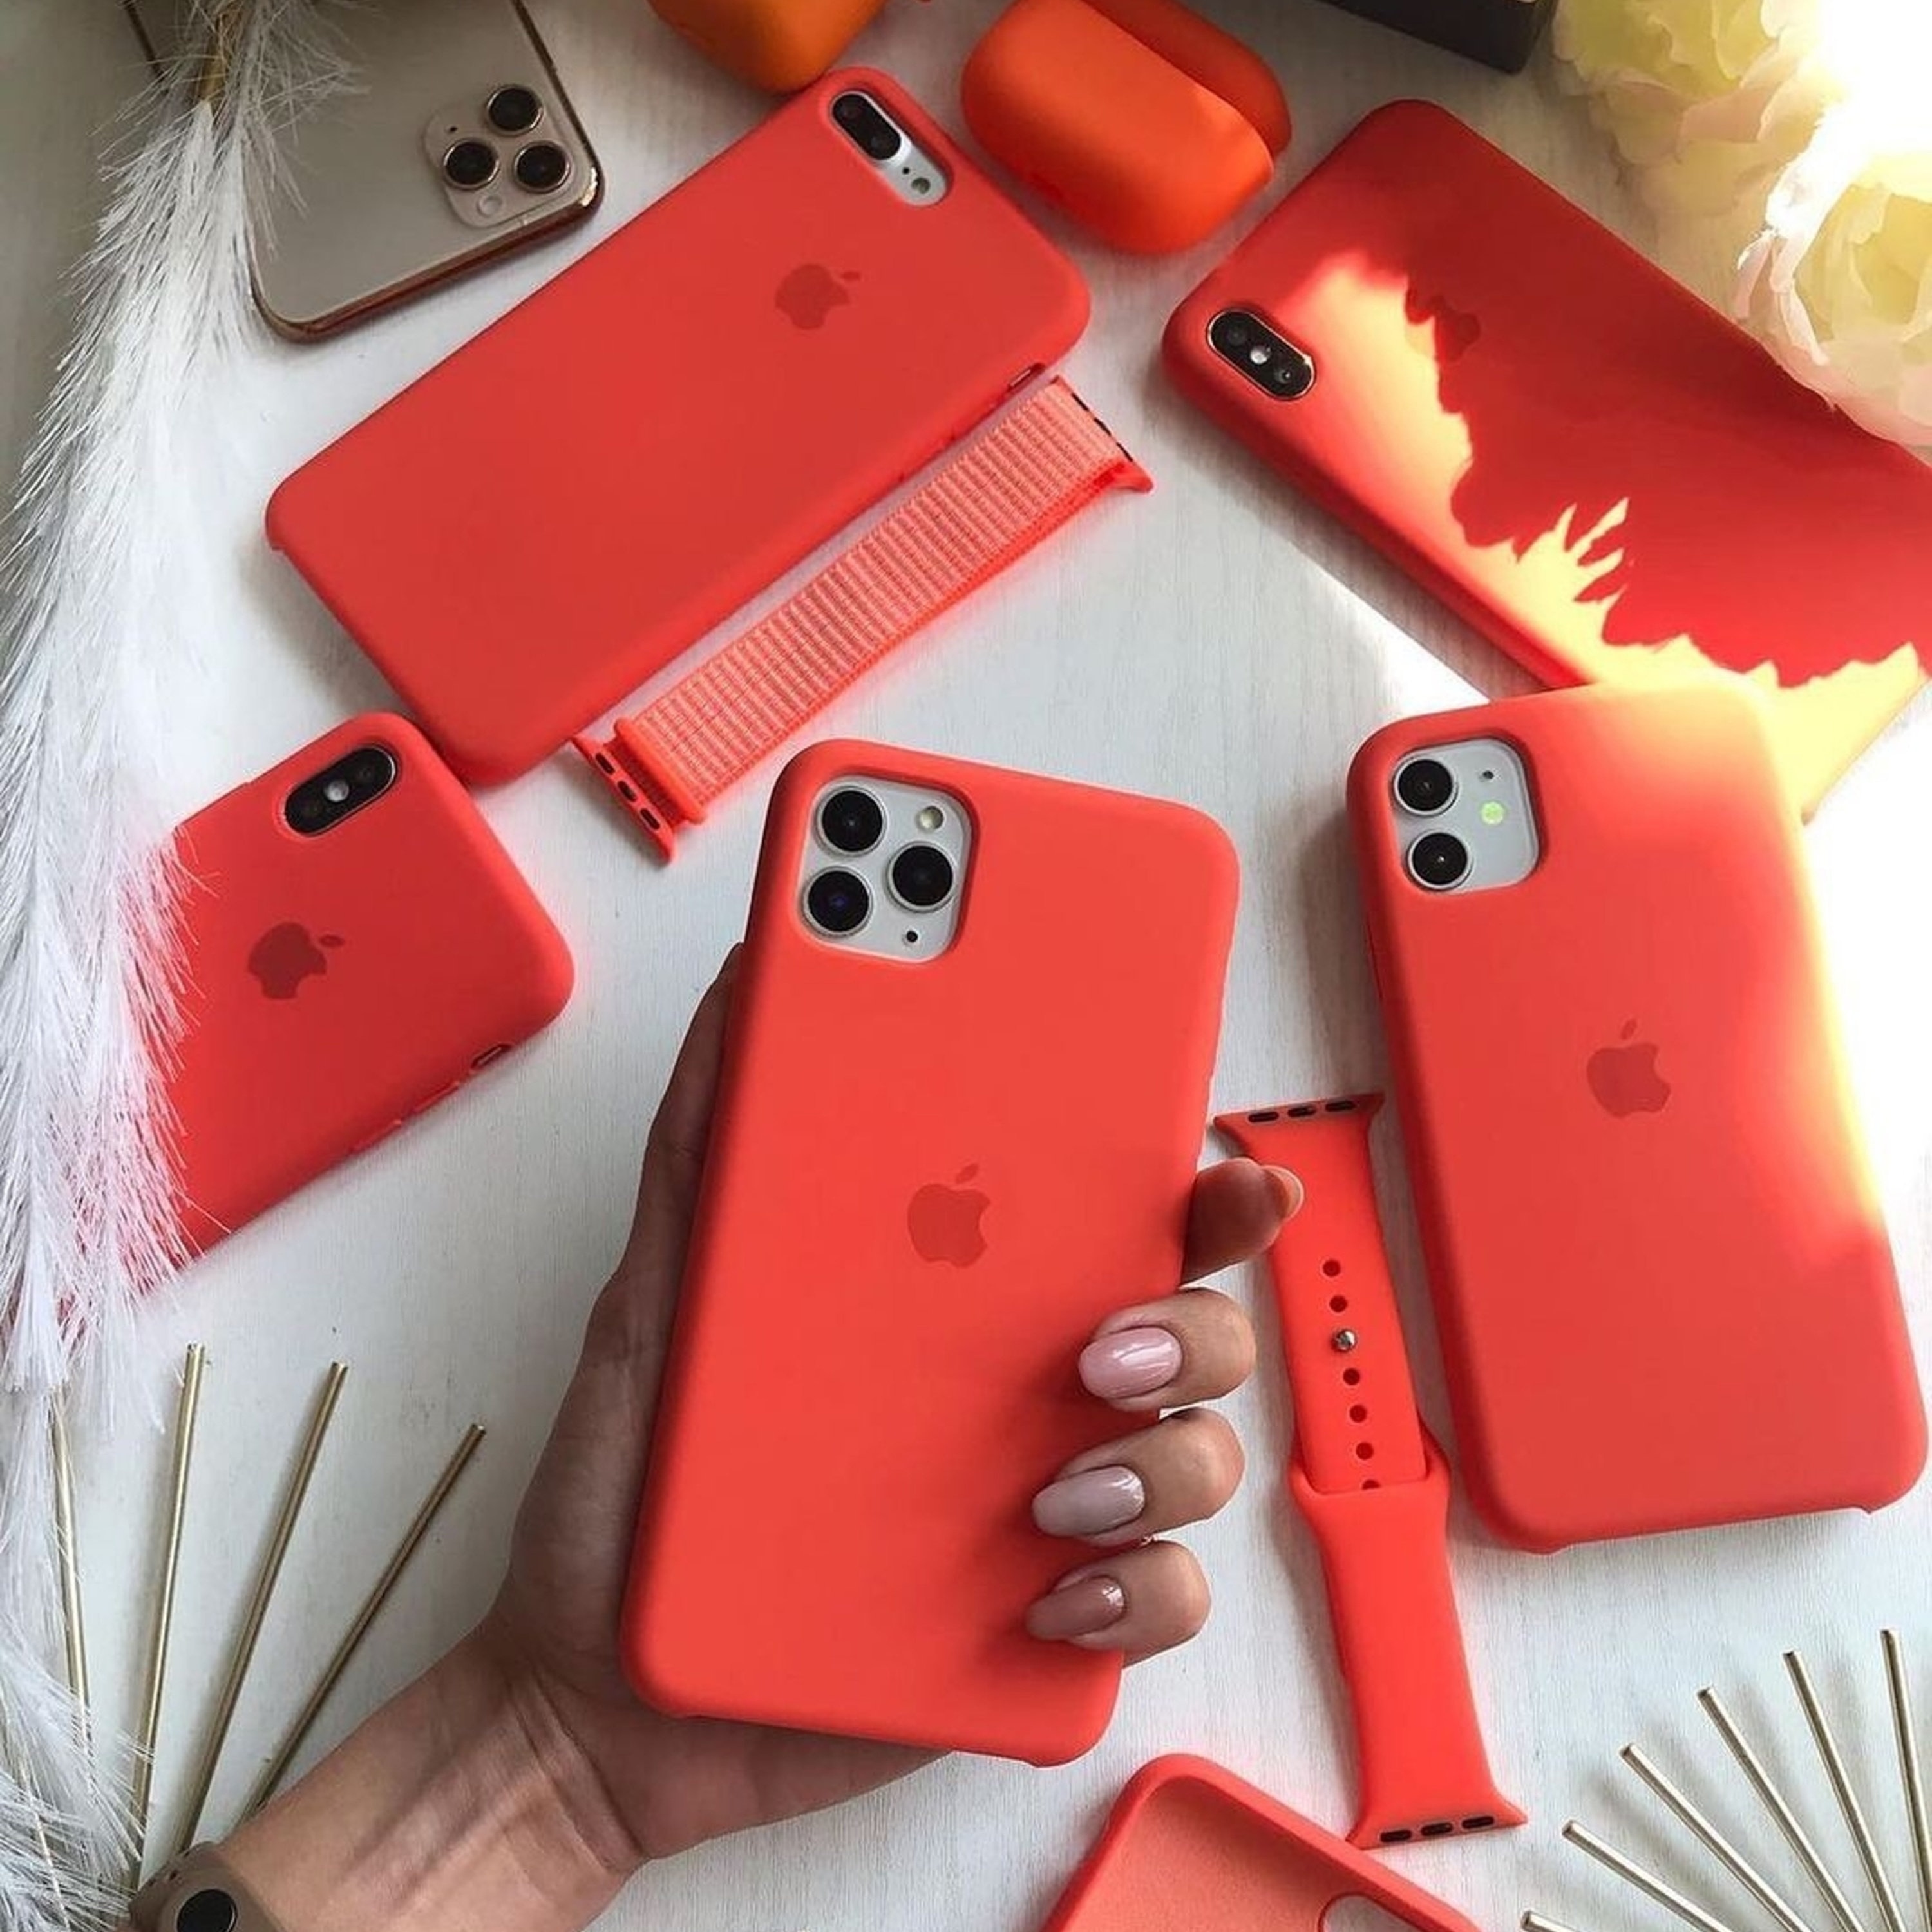 iPhone 11 Pro Silicone Case - Clementine - Apple